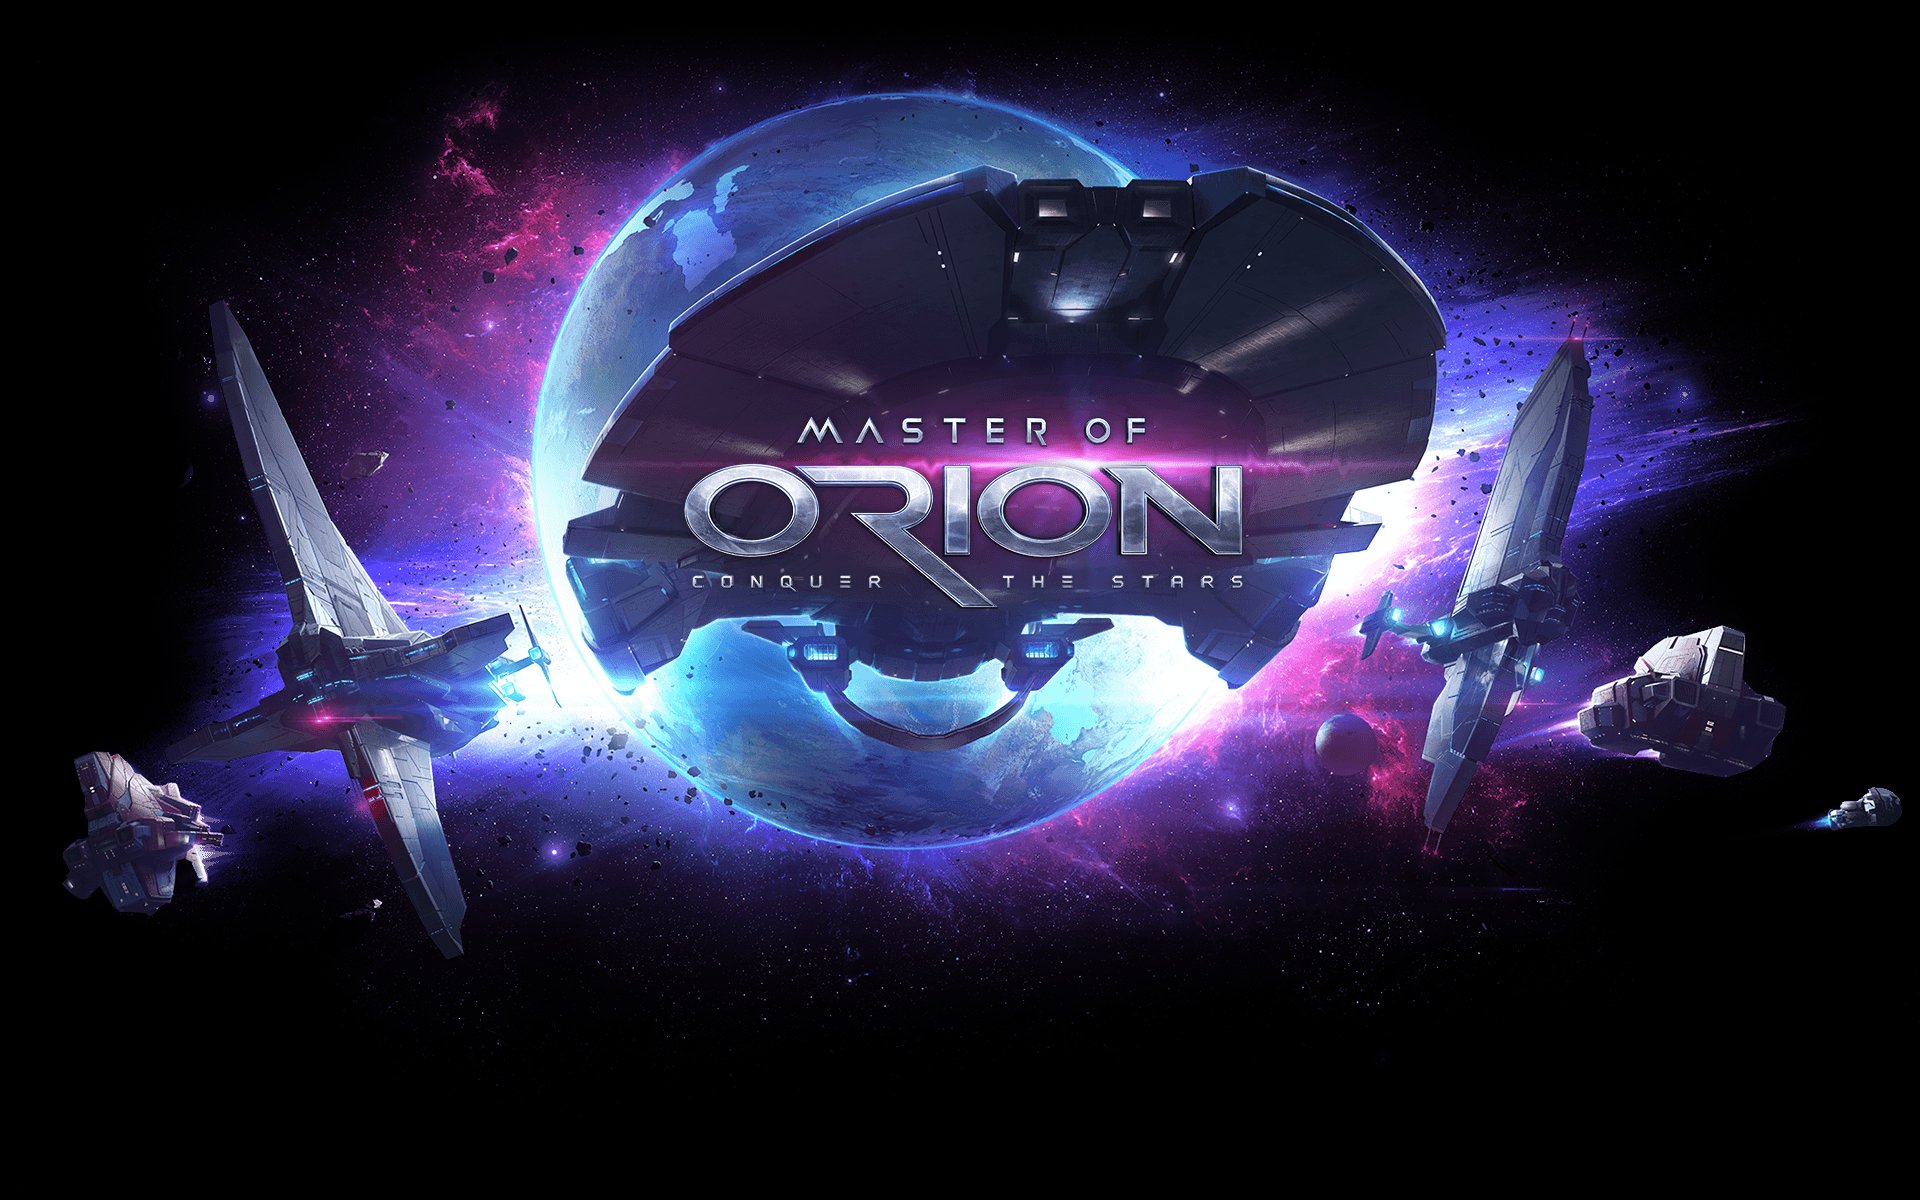 master, Of, Orion, Game, Sci fi, Futuristic, Science, Fiction, Technics, Space, Strategy, Action, Fighting, Moo, Conquer, Stars, Alien, Aliens, Spaceship, Ship, Warship, Battleship Wallpaper